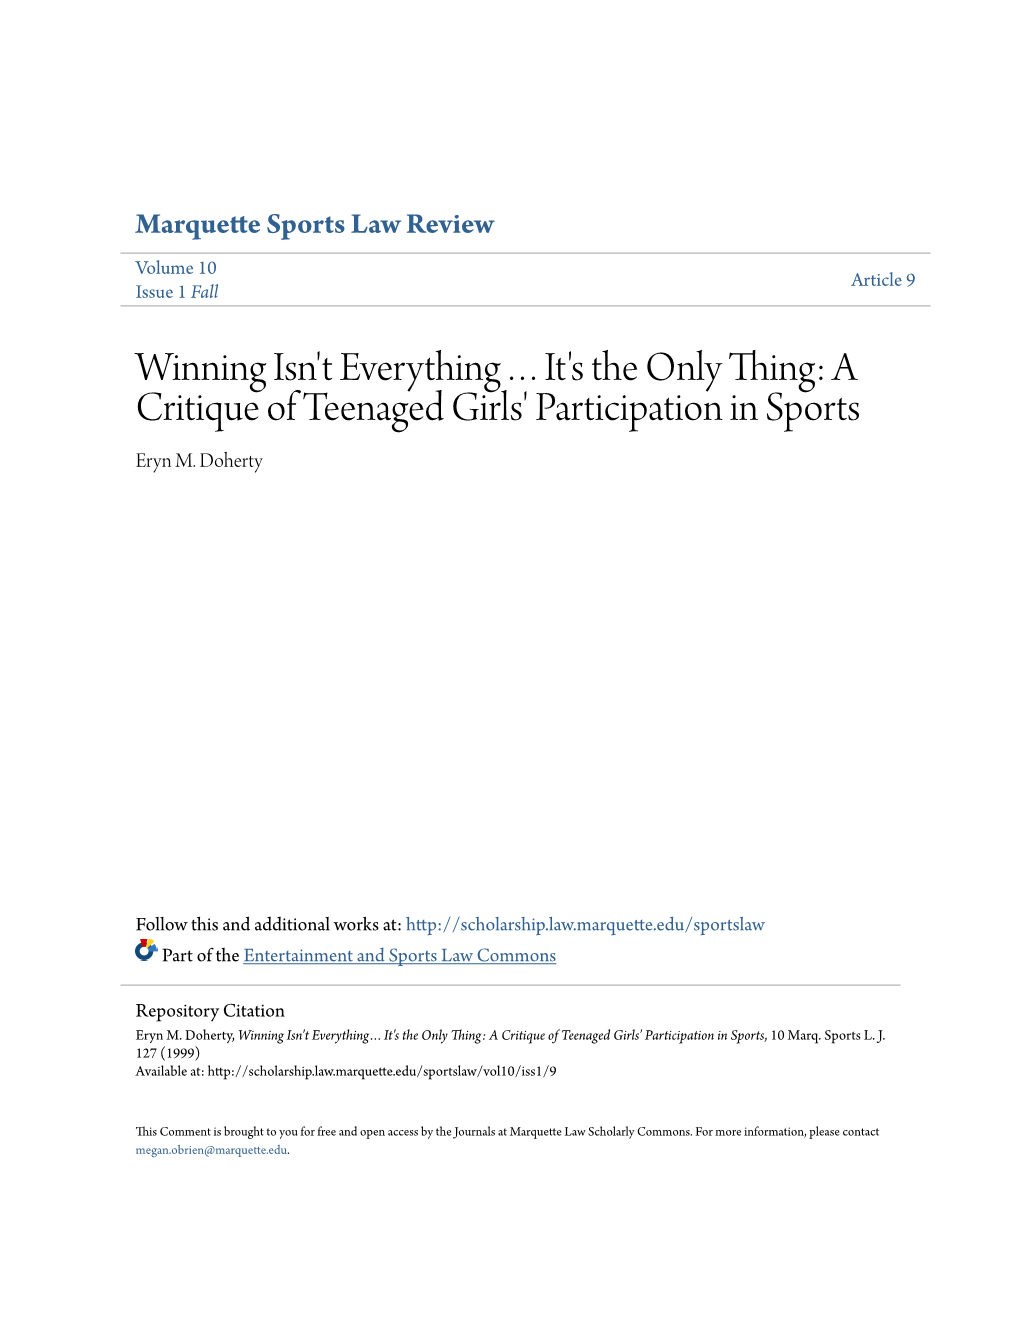 Winning Isn't Everything…It's the Only Thing: a Critique of Teenaged Girls' Participation in Sports Eryn M